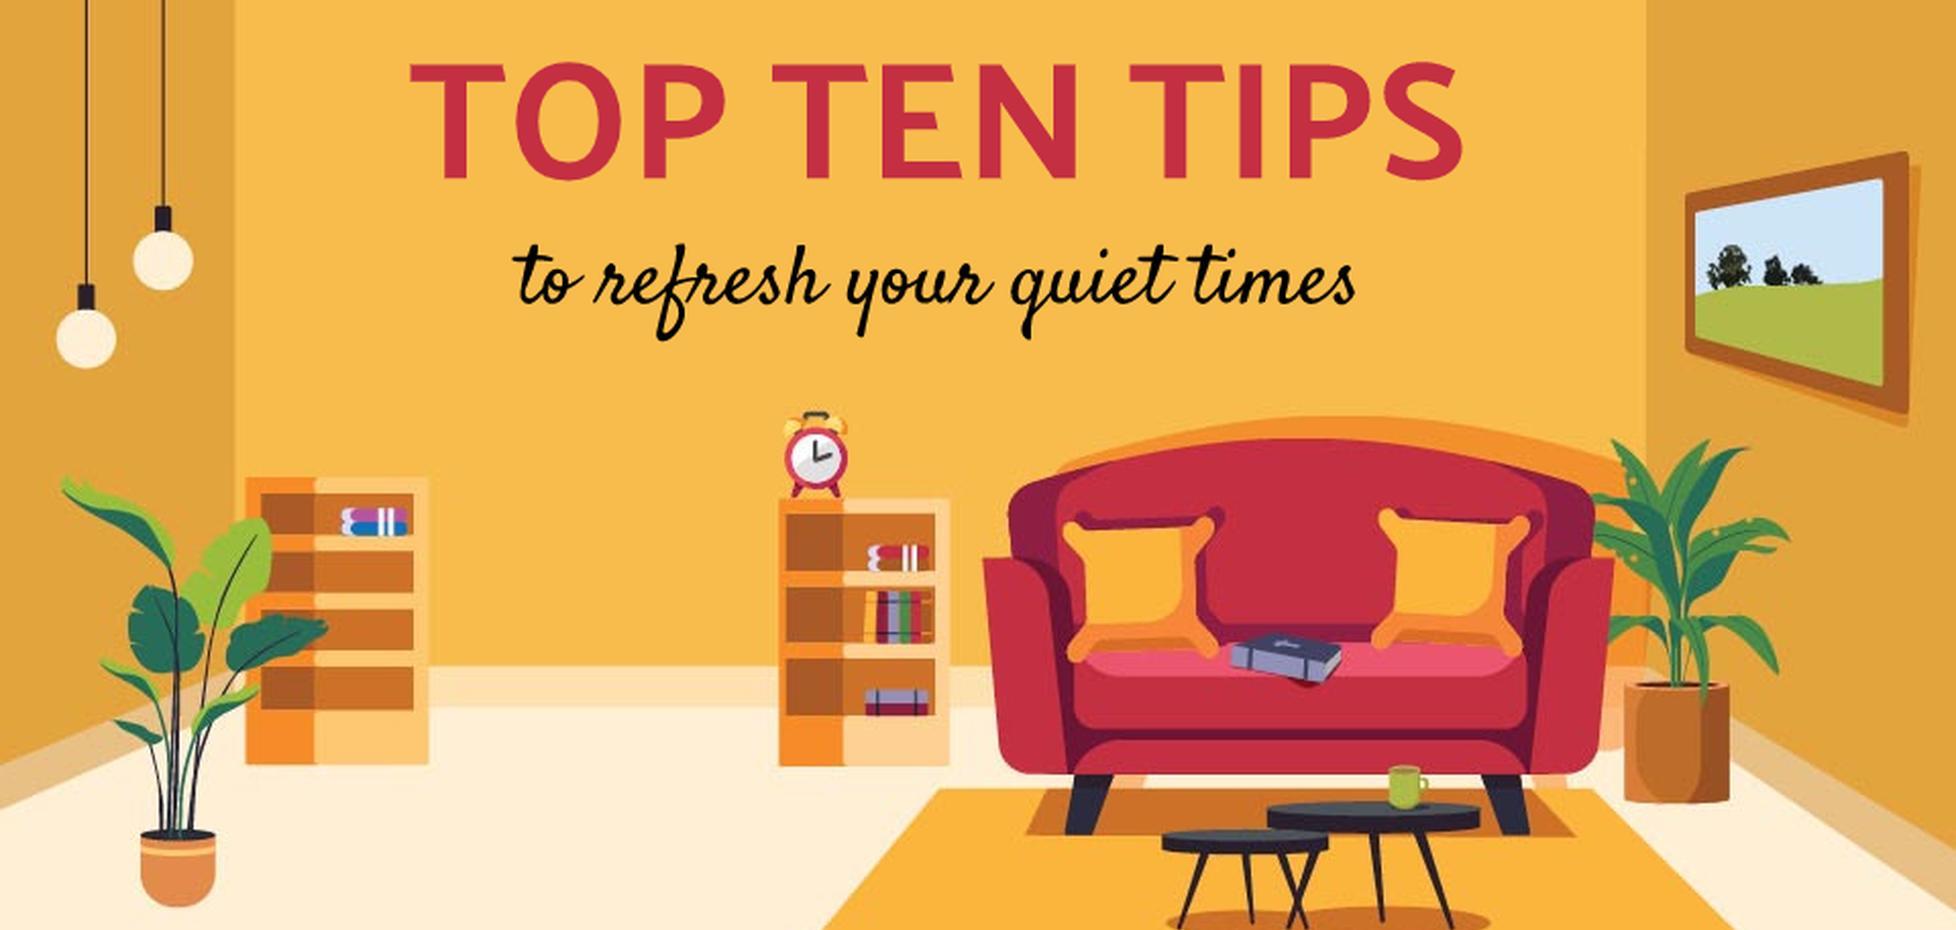 Top 10 Tips to Refresh Your Quiet Time